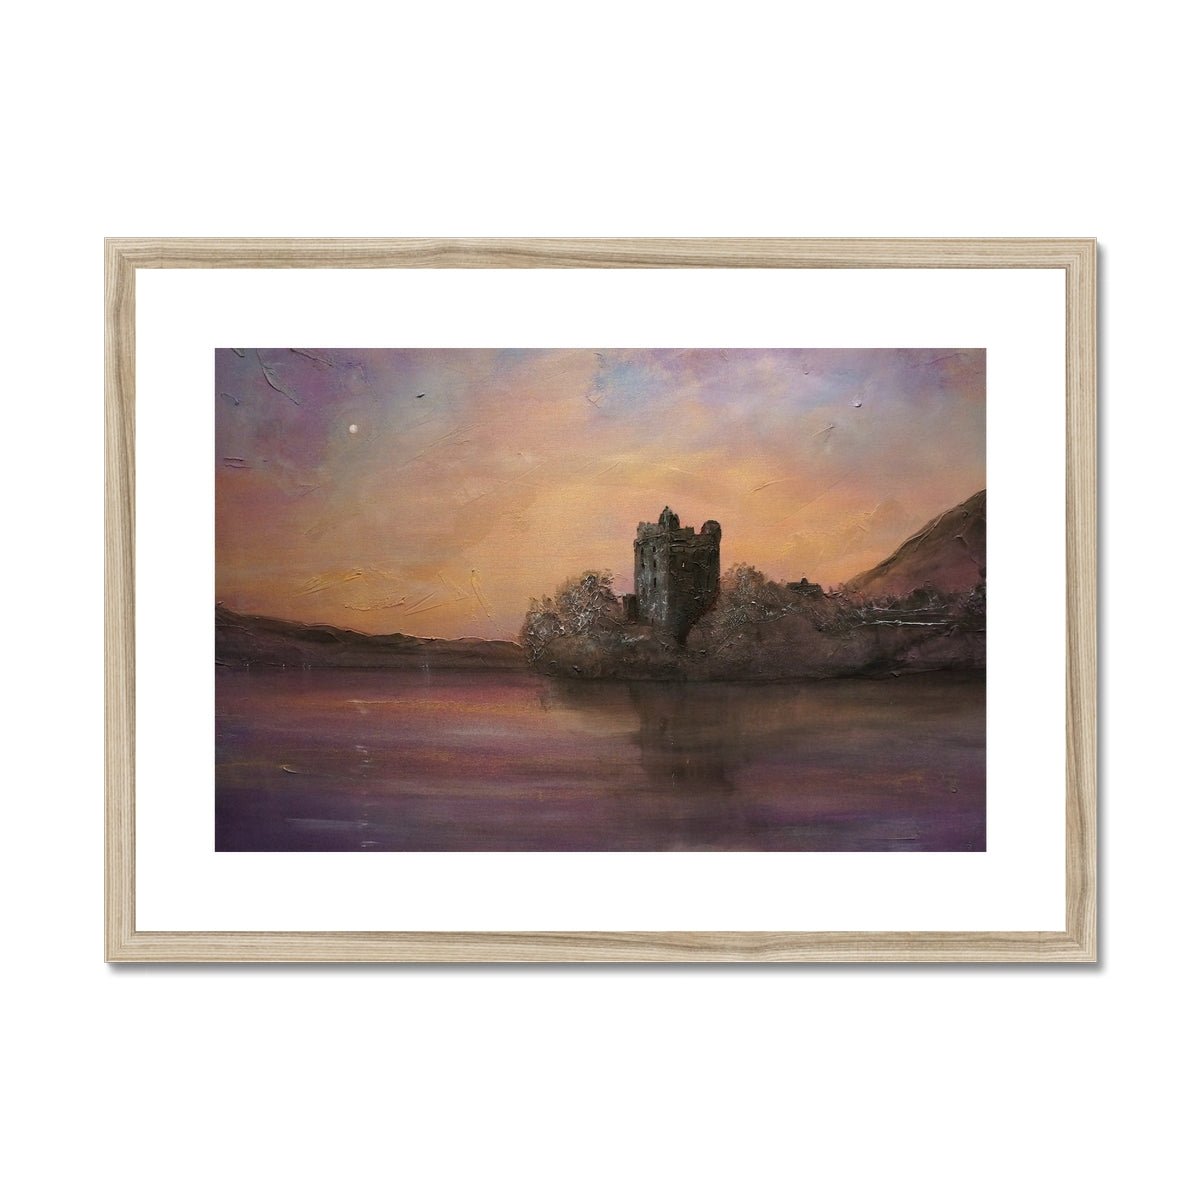 Urquhart Castle Moonlight Painting | Framed & Mounted Prints From Scotland-Framed & Mounted Prints-Historic & Iconic Scotland Art Gallery-A2 Landscape-Natural Frame-Paintings, Prints, Homeware, Art Gifts From Scotland By Scottish Artist Kevin Hunter